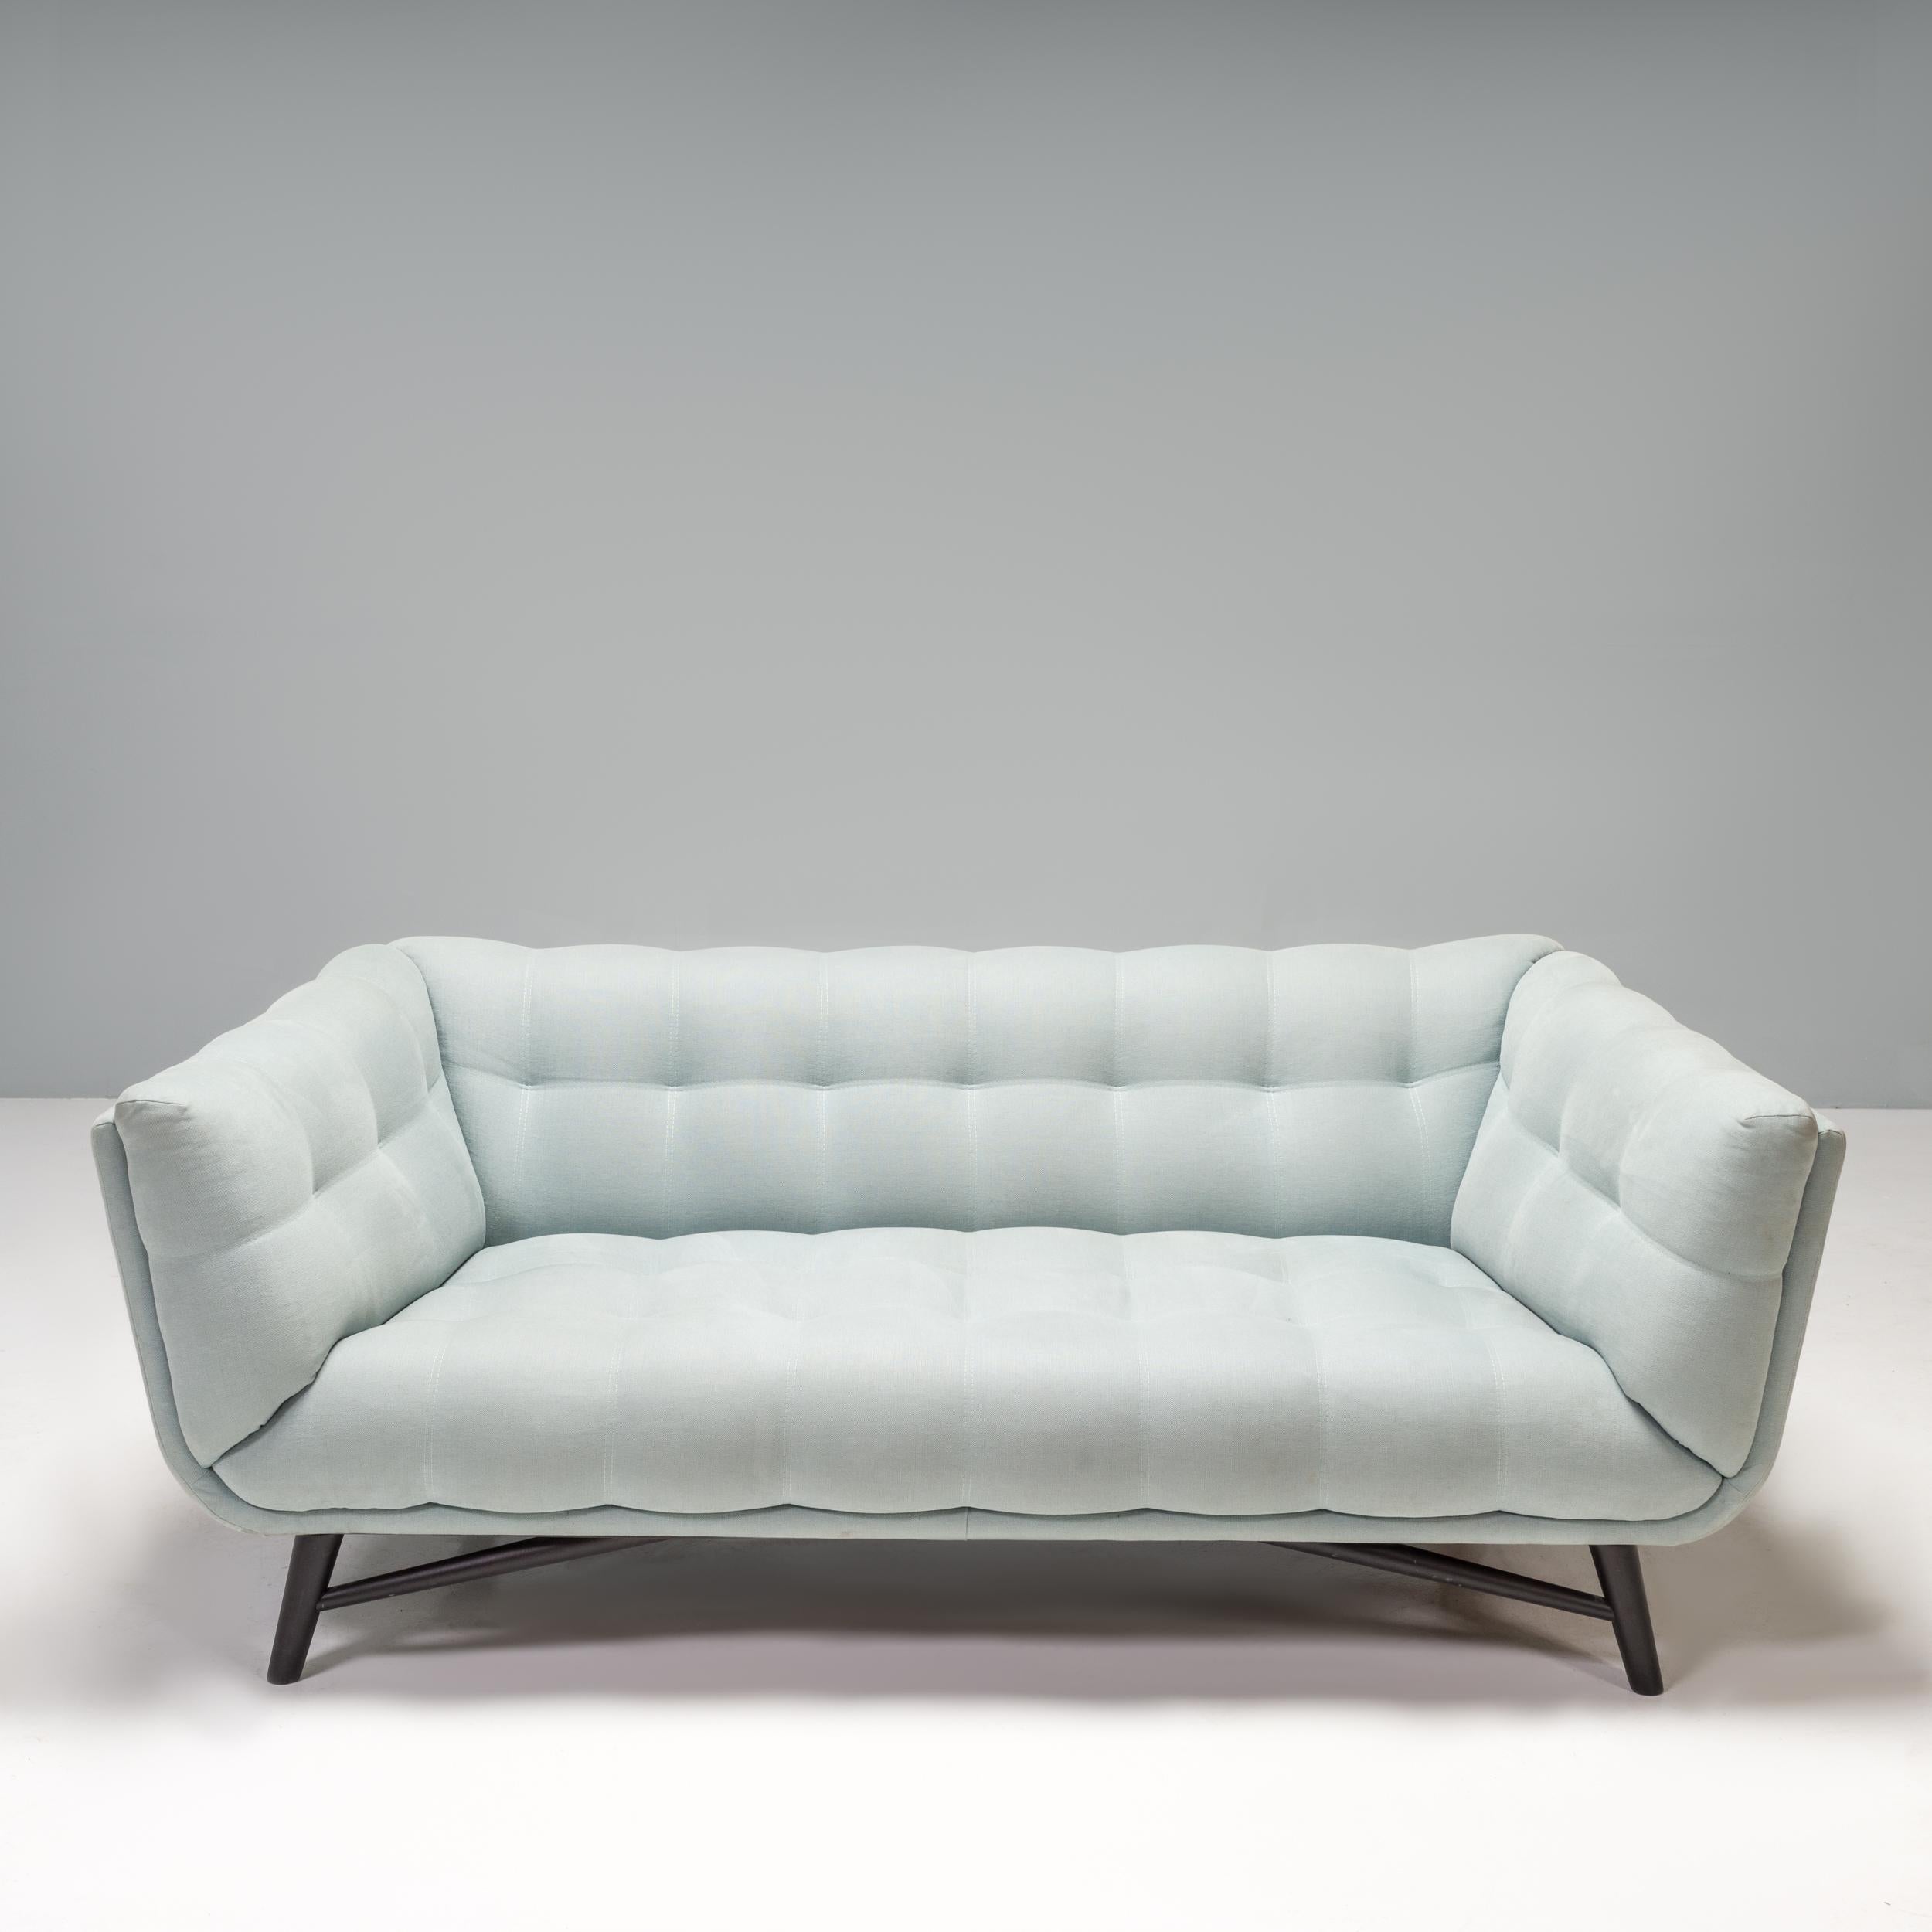 Designed by Roberto Tapinassi and Maurizio Manzoni for Roche Bobois, the Profile sofa offers a contemporary update on the classic Mid-Century Tuxedo style.

Constructed from a fir wood and pine ply structure, the sofa sits on four angular legs in